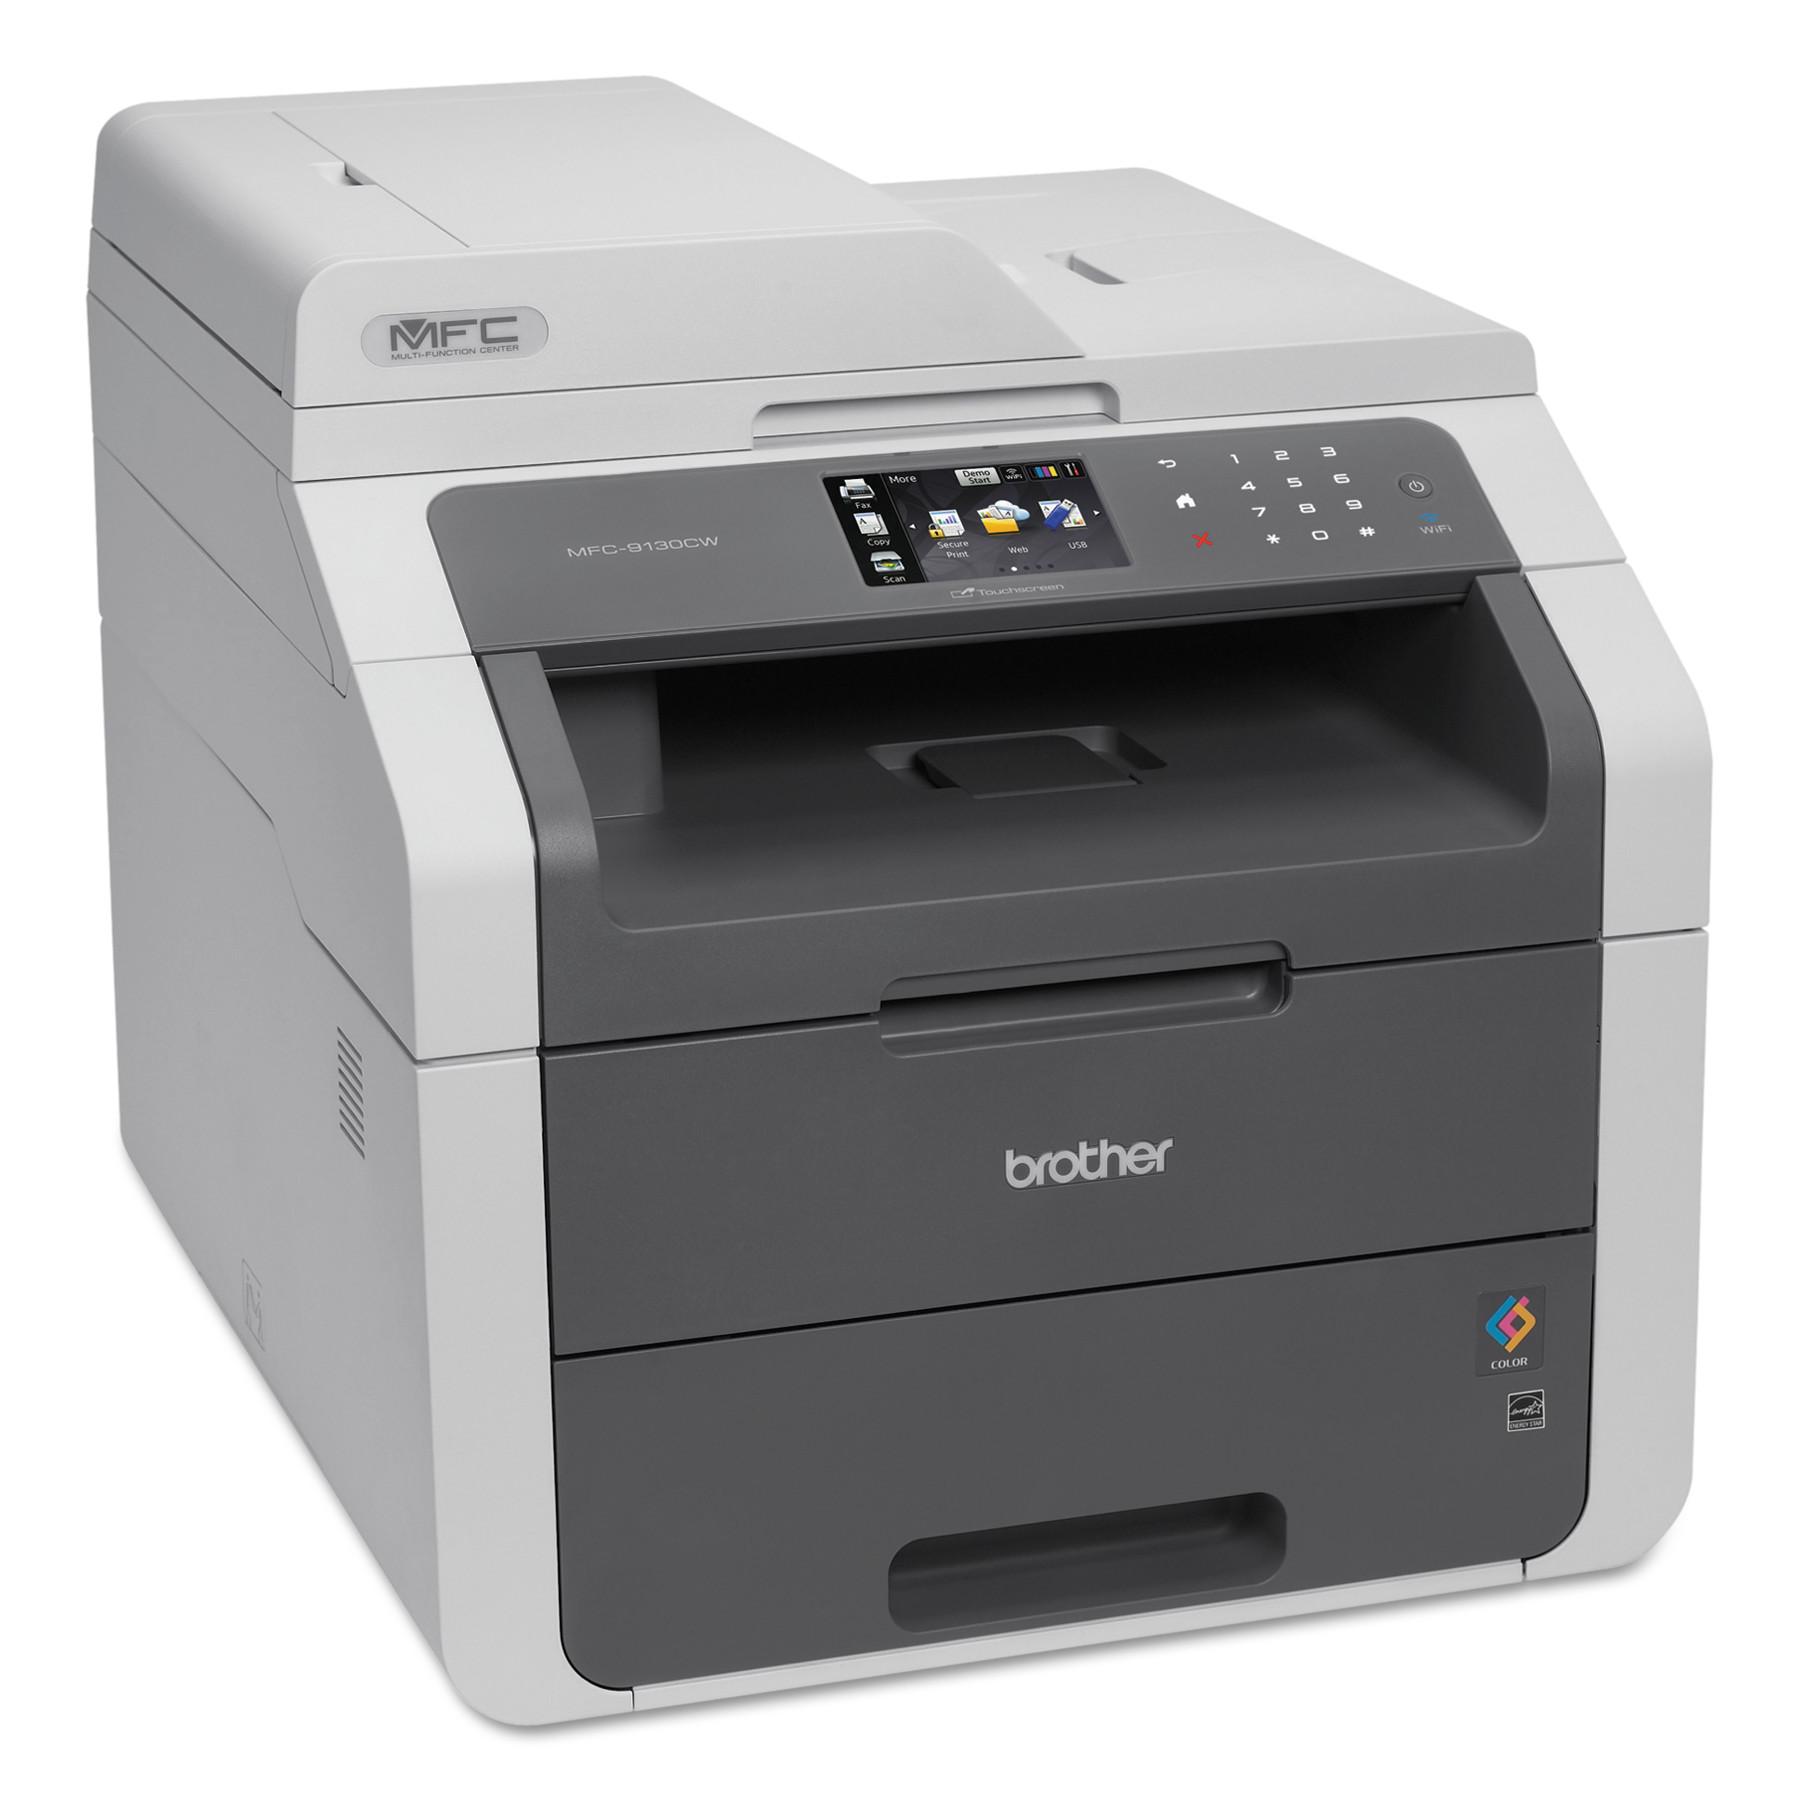 Brother MFC-9130CW Digital Color All-in-One with Wireless Networking Printer/Copier/Scanner/Fax Machine - image 3 of 3